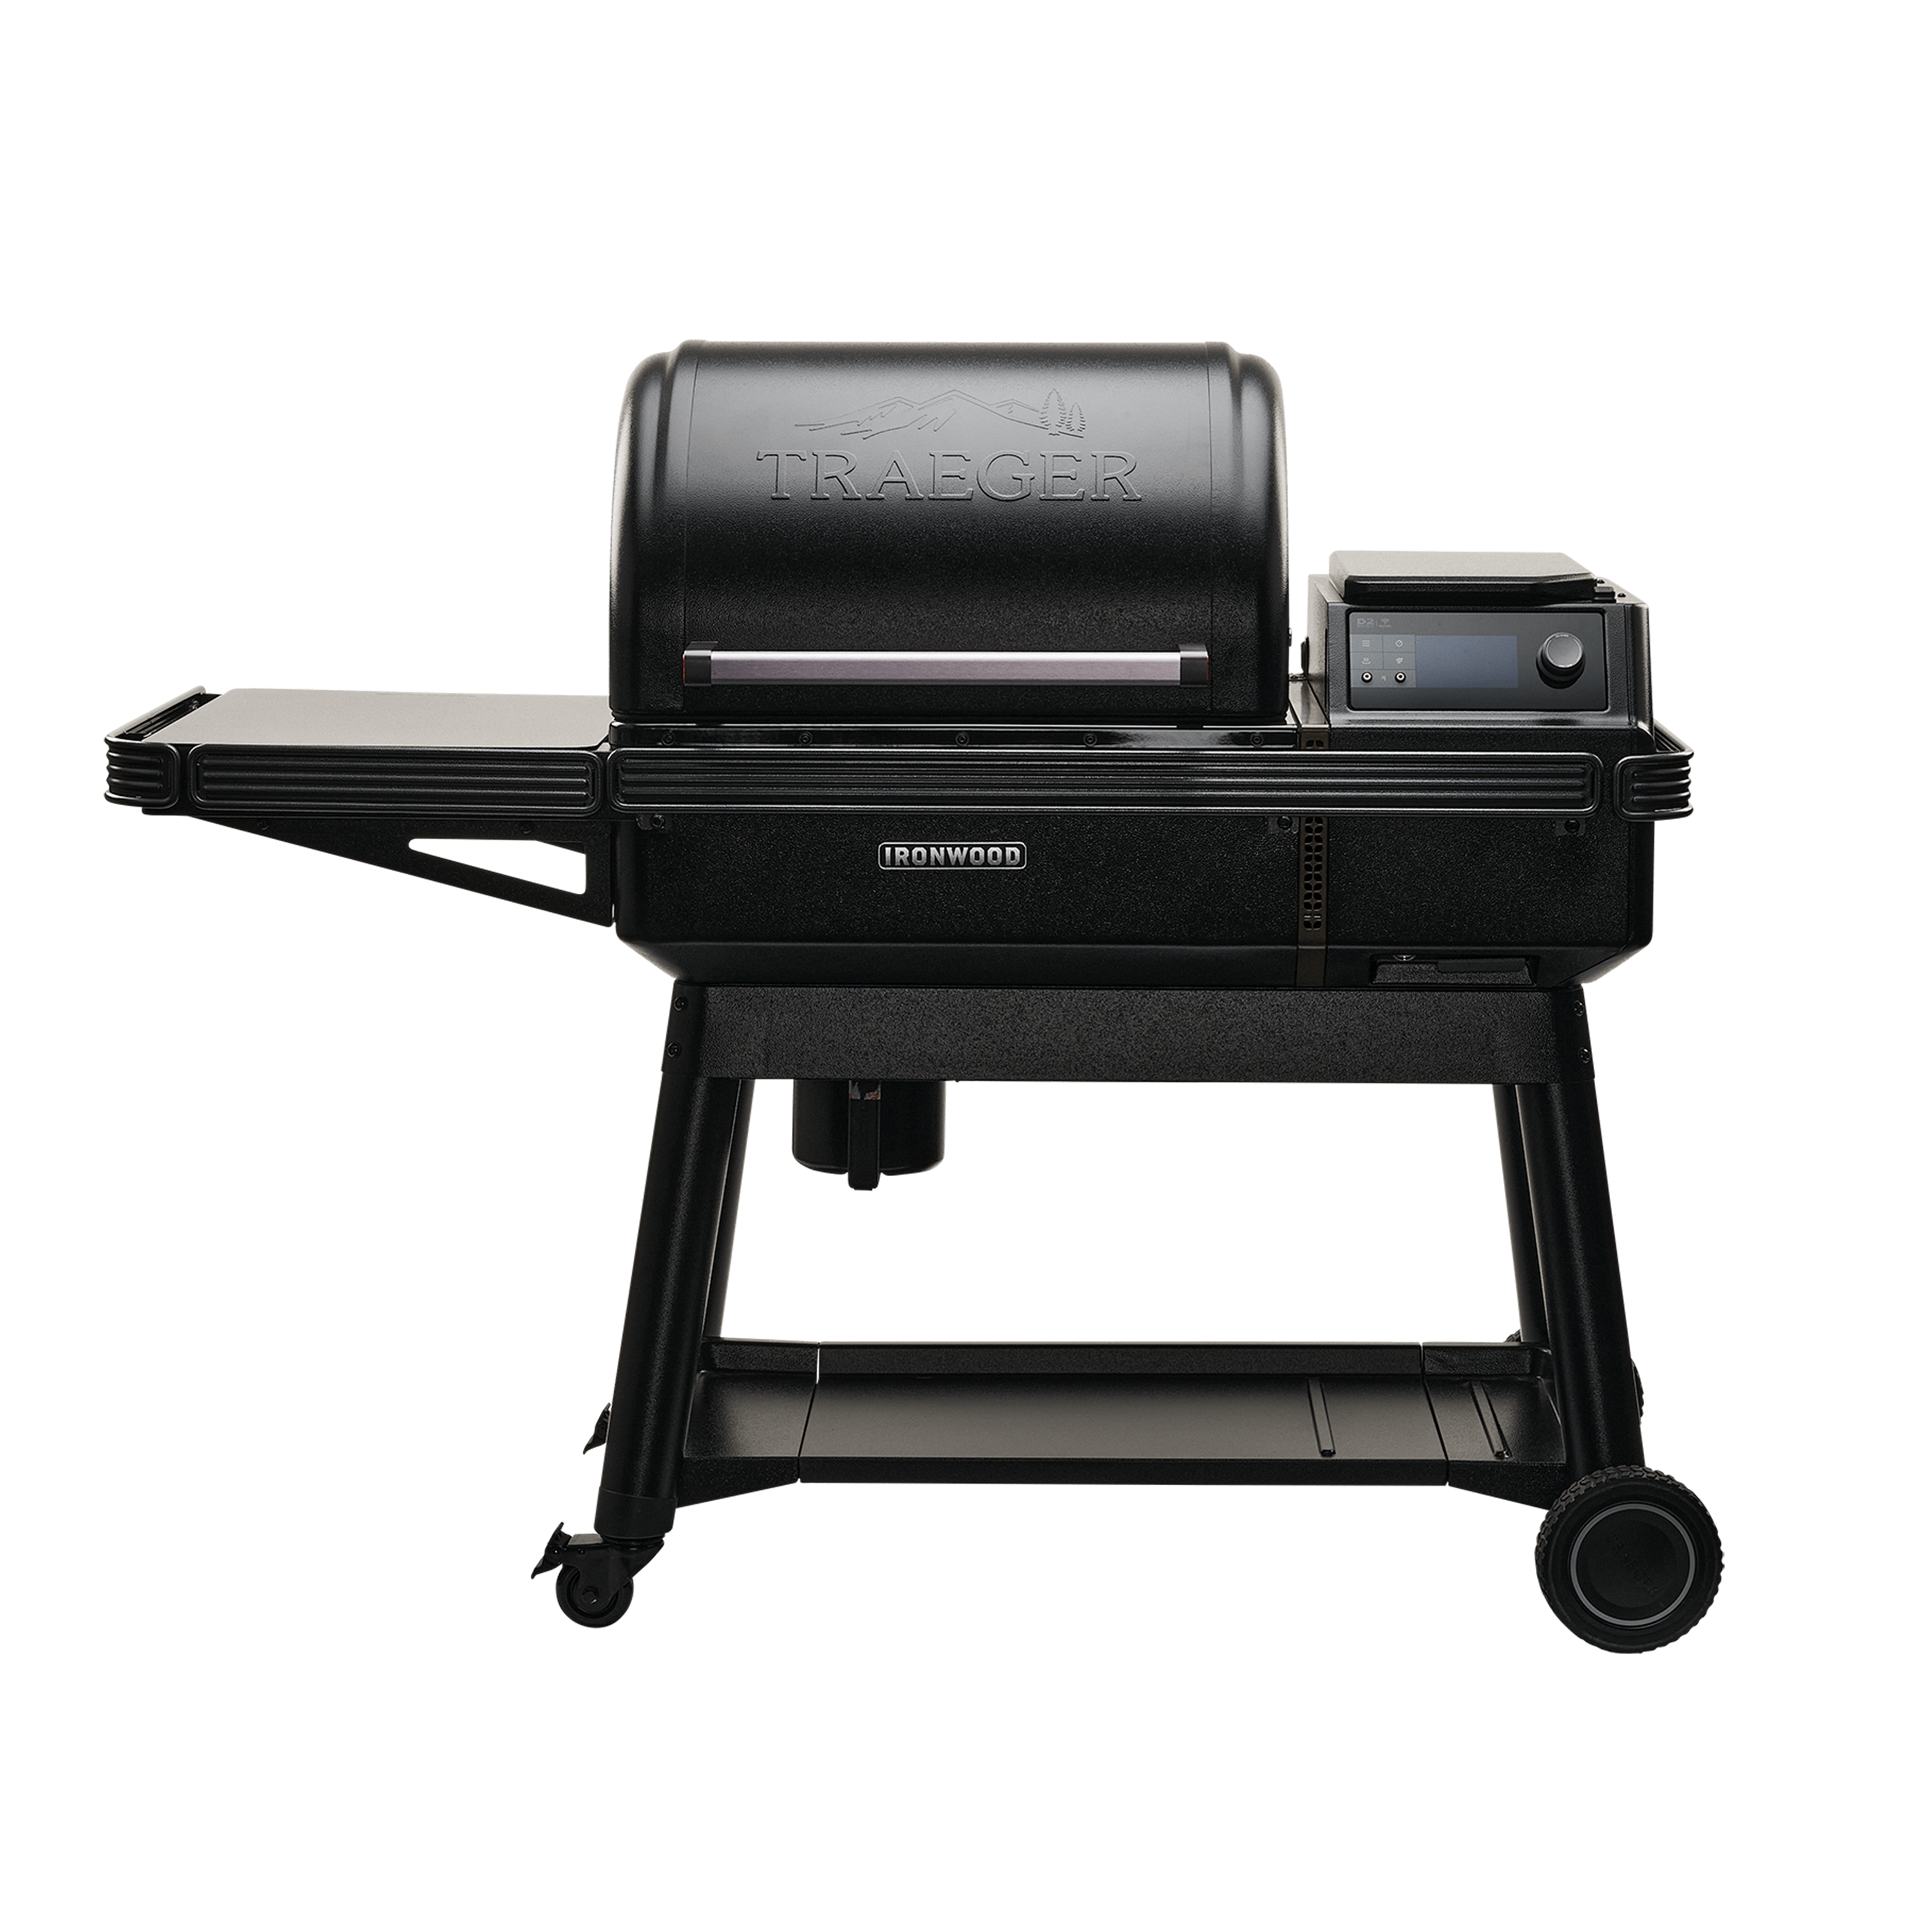 Traeger Ironwood Pallet Grill